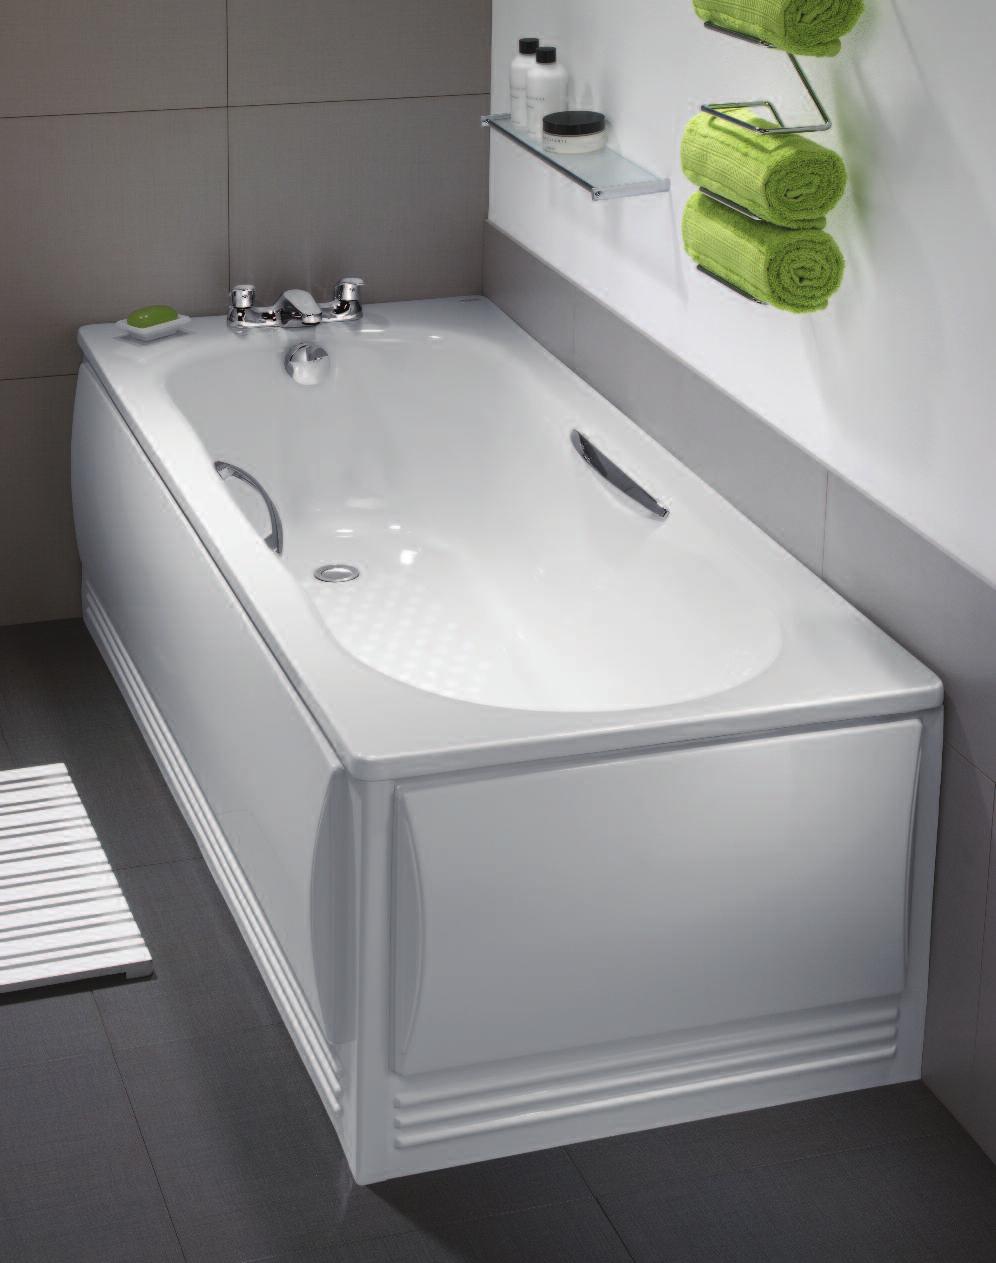 Celtic steel bath The well-known Celtic steel baths are a comprehensive range covering a number of dimensions and options, including a low volume 140 litre version which uses up to 35% less water